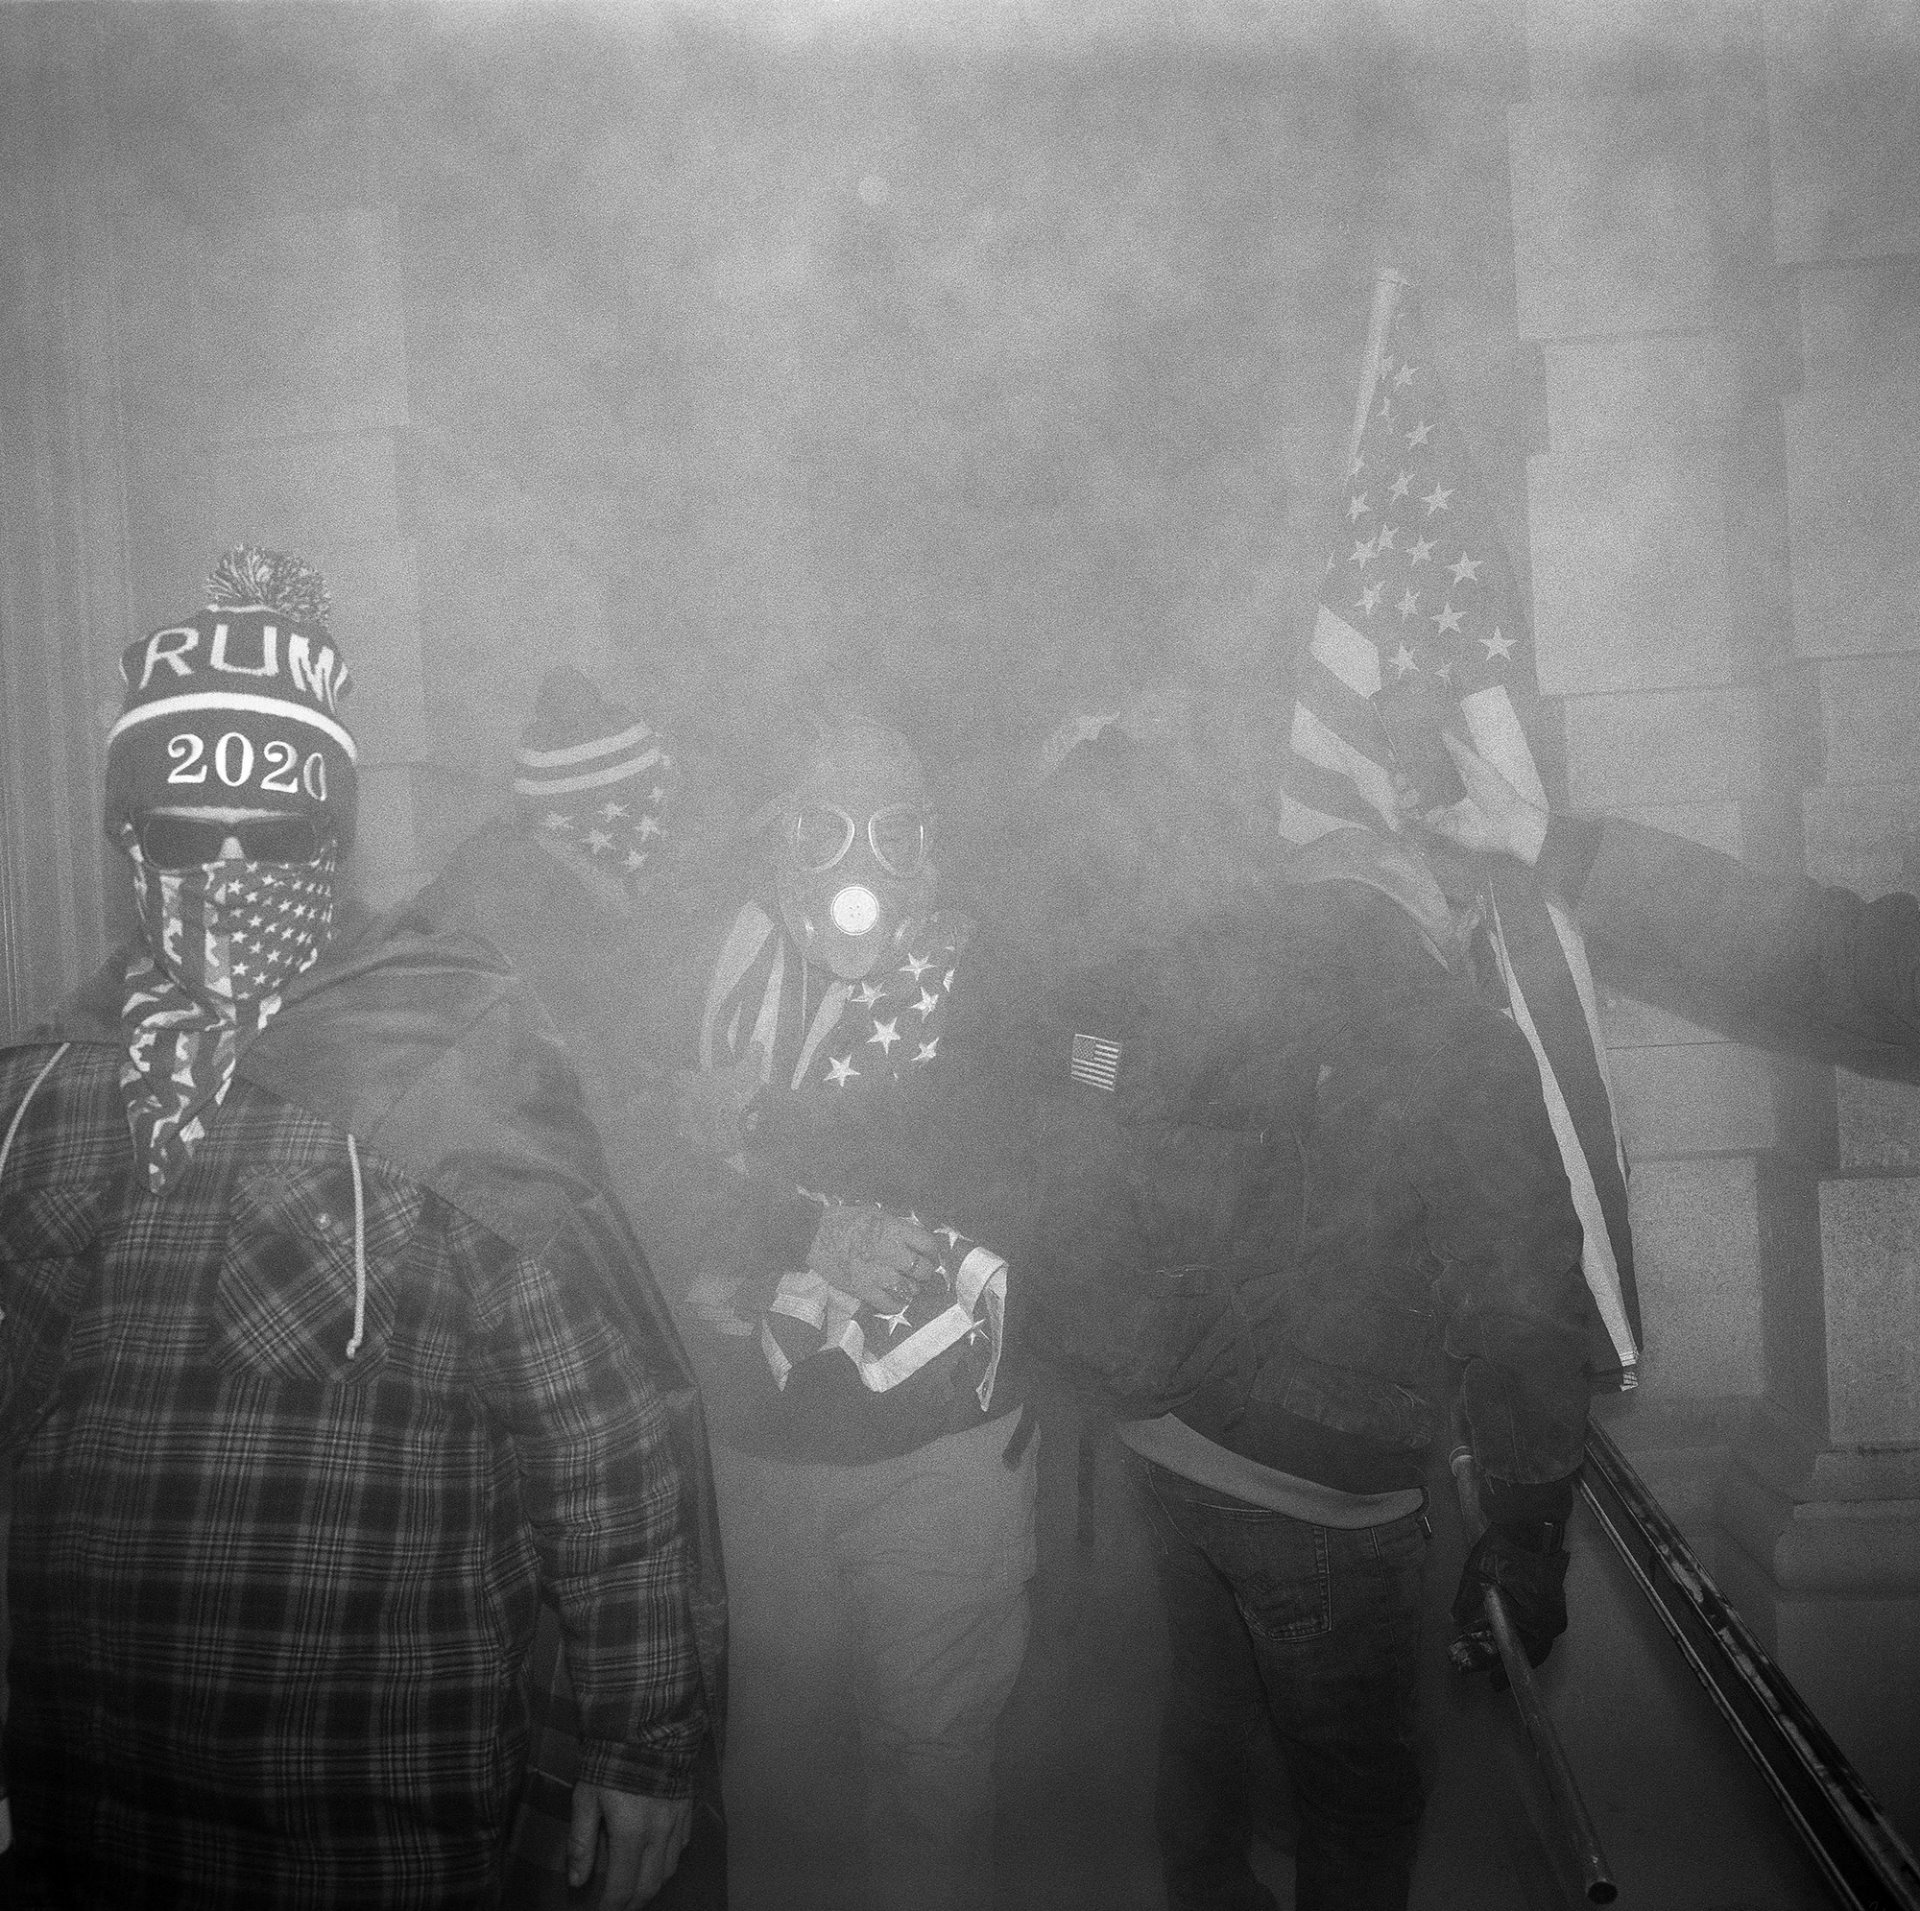 Pro-Trump protesters breaching the Capitol in Washington DC, USA are seen in a cloud of tear gas, pepper spray and dust from fire extinguishers, which were used as weapons against police at the North Entrance to the building.